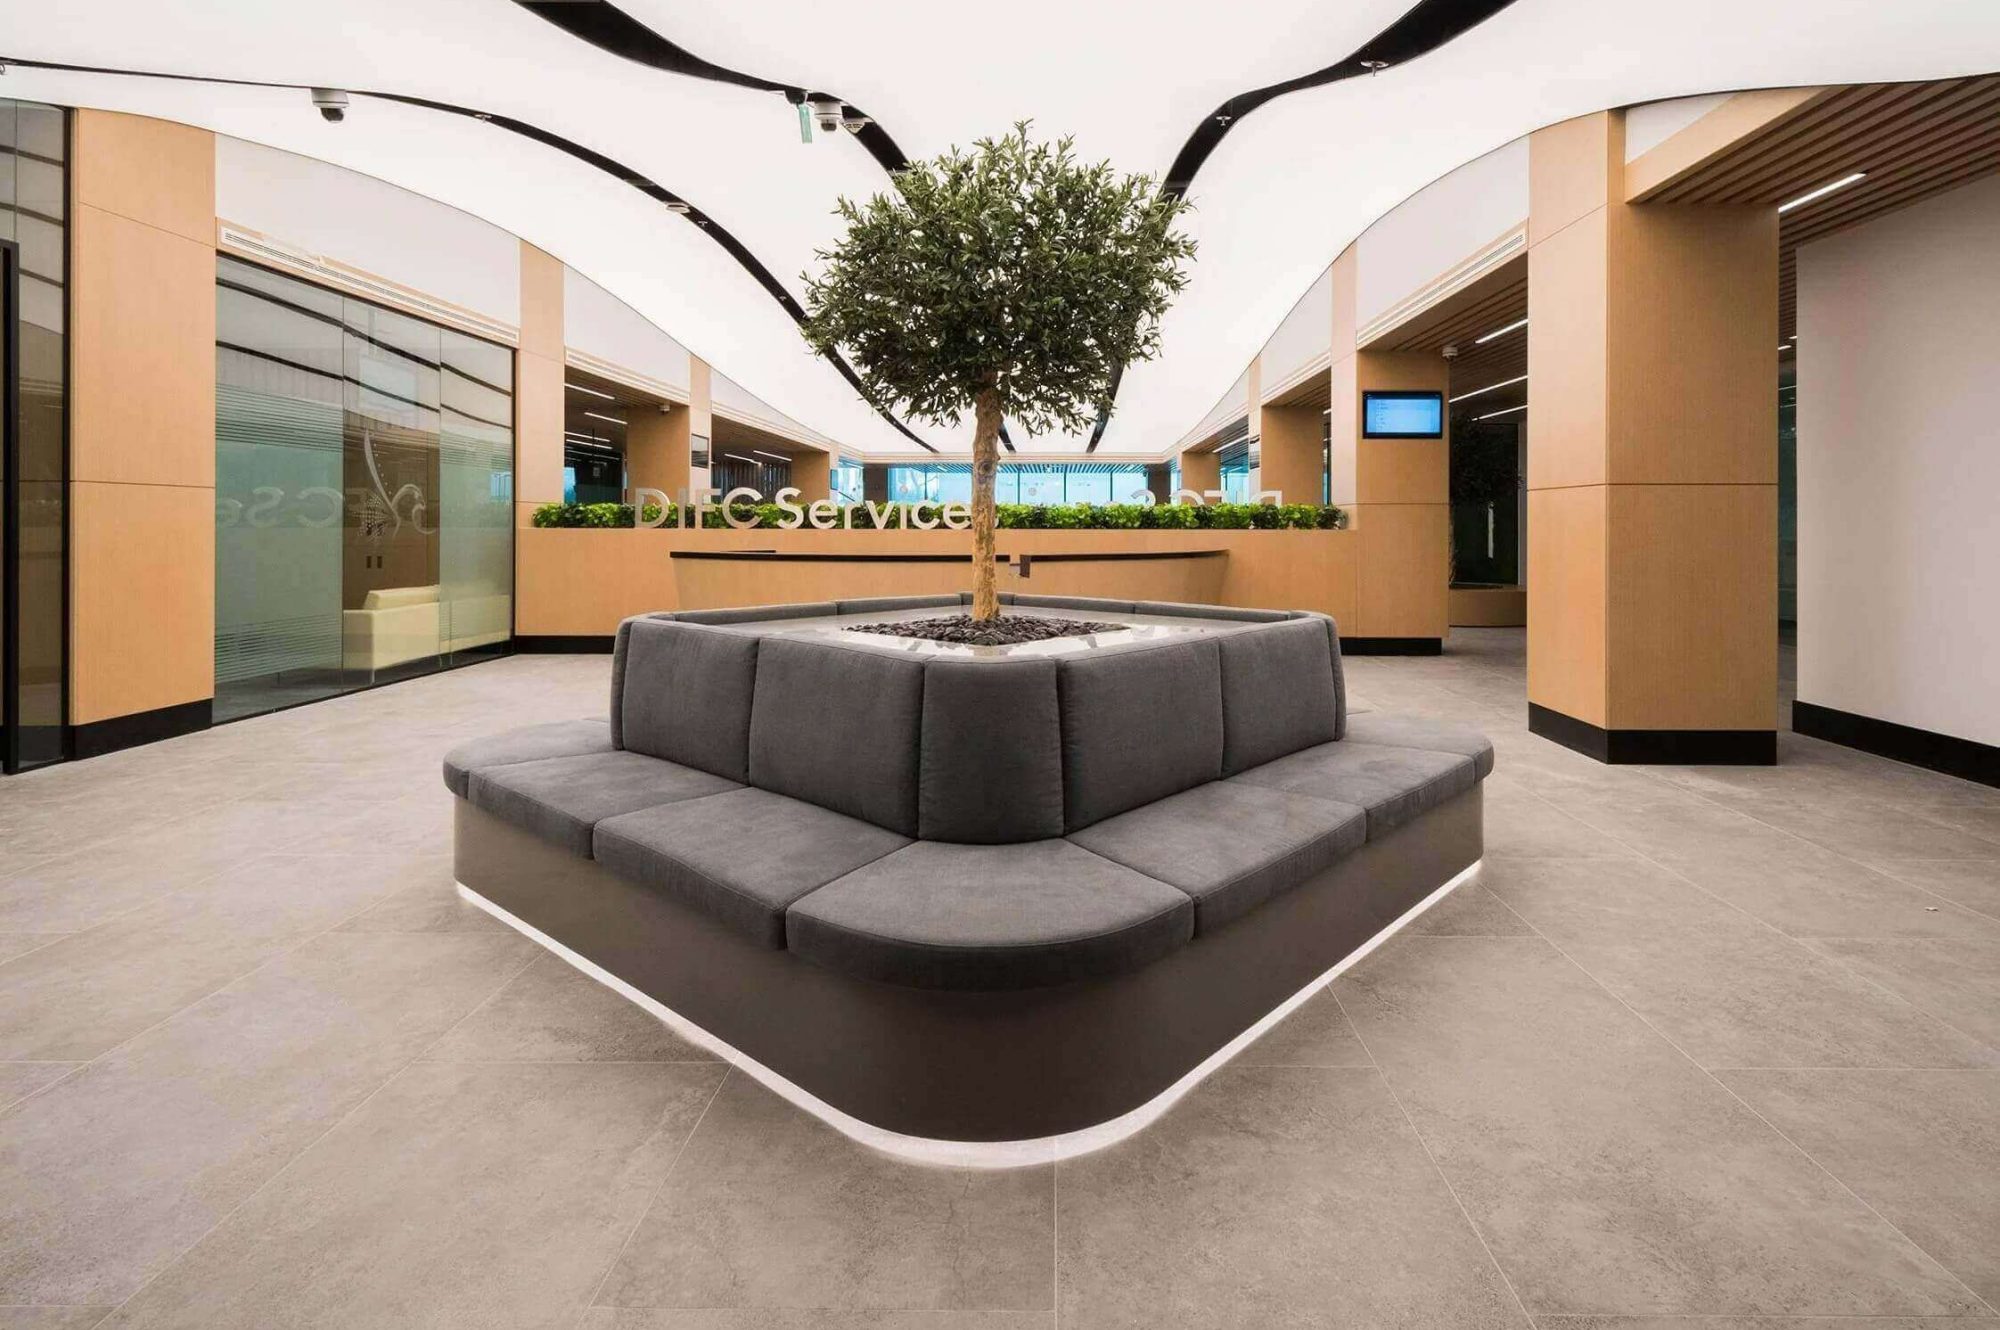 cureved sofas in an office building with curved ligt box.